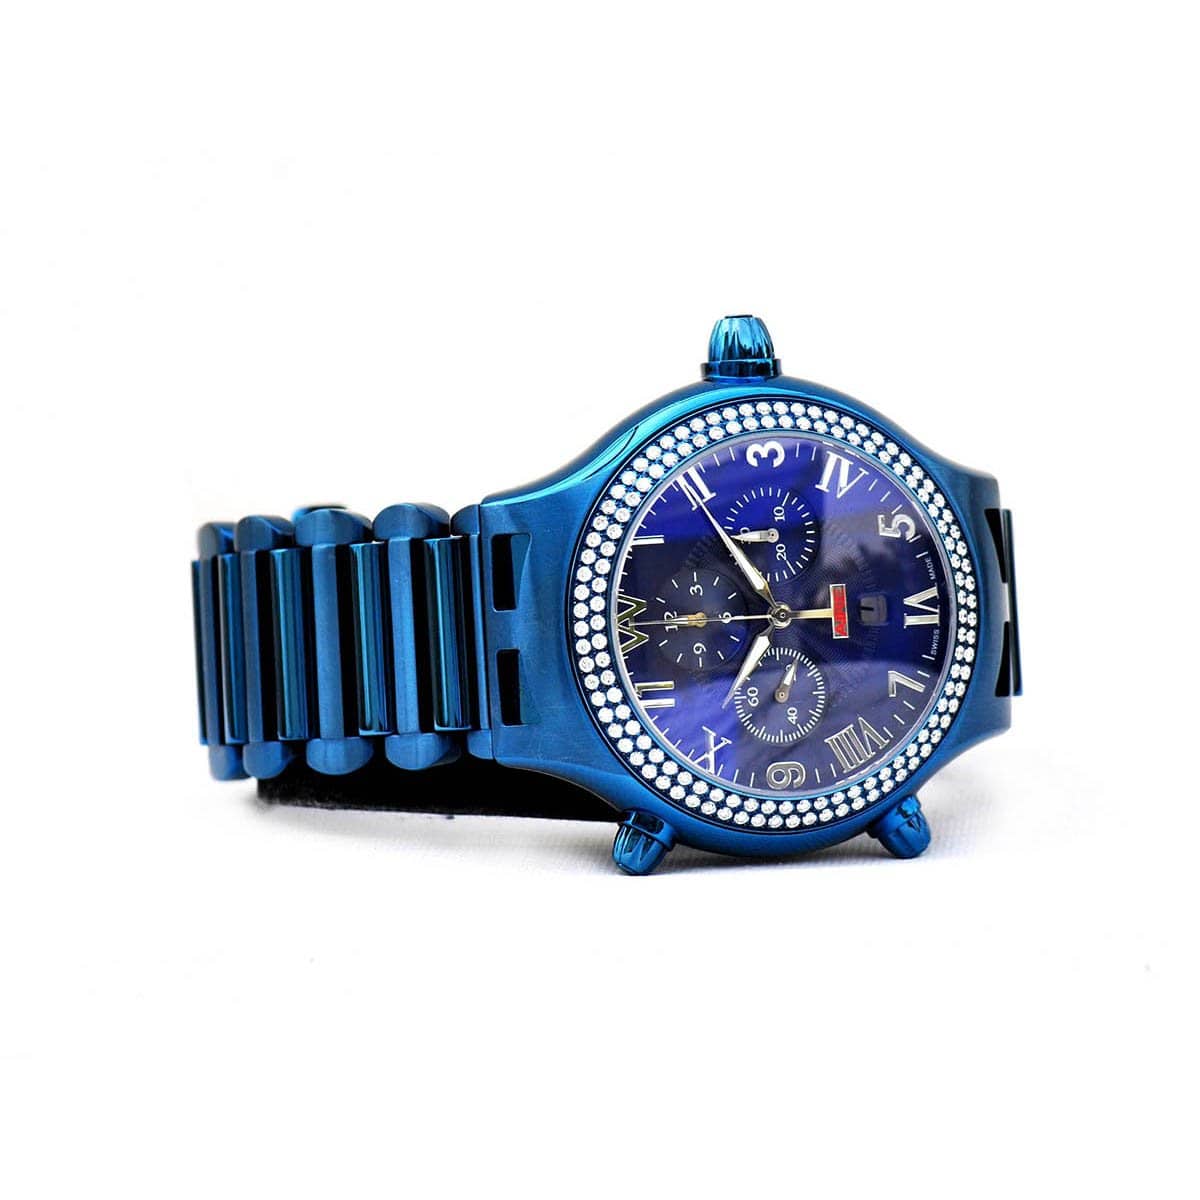 CHRIS AIRE WATCH - PARLAY BLUE LAGOON - Chris Aire Fine Jewelry & Timepieces